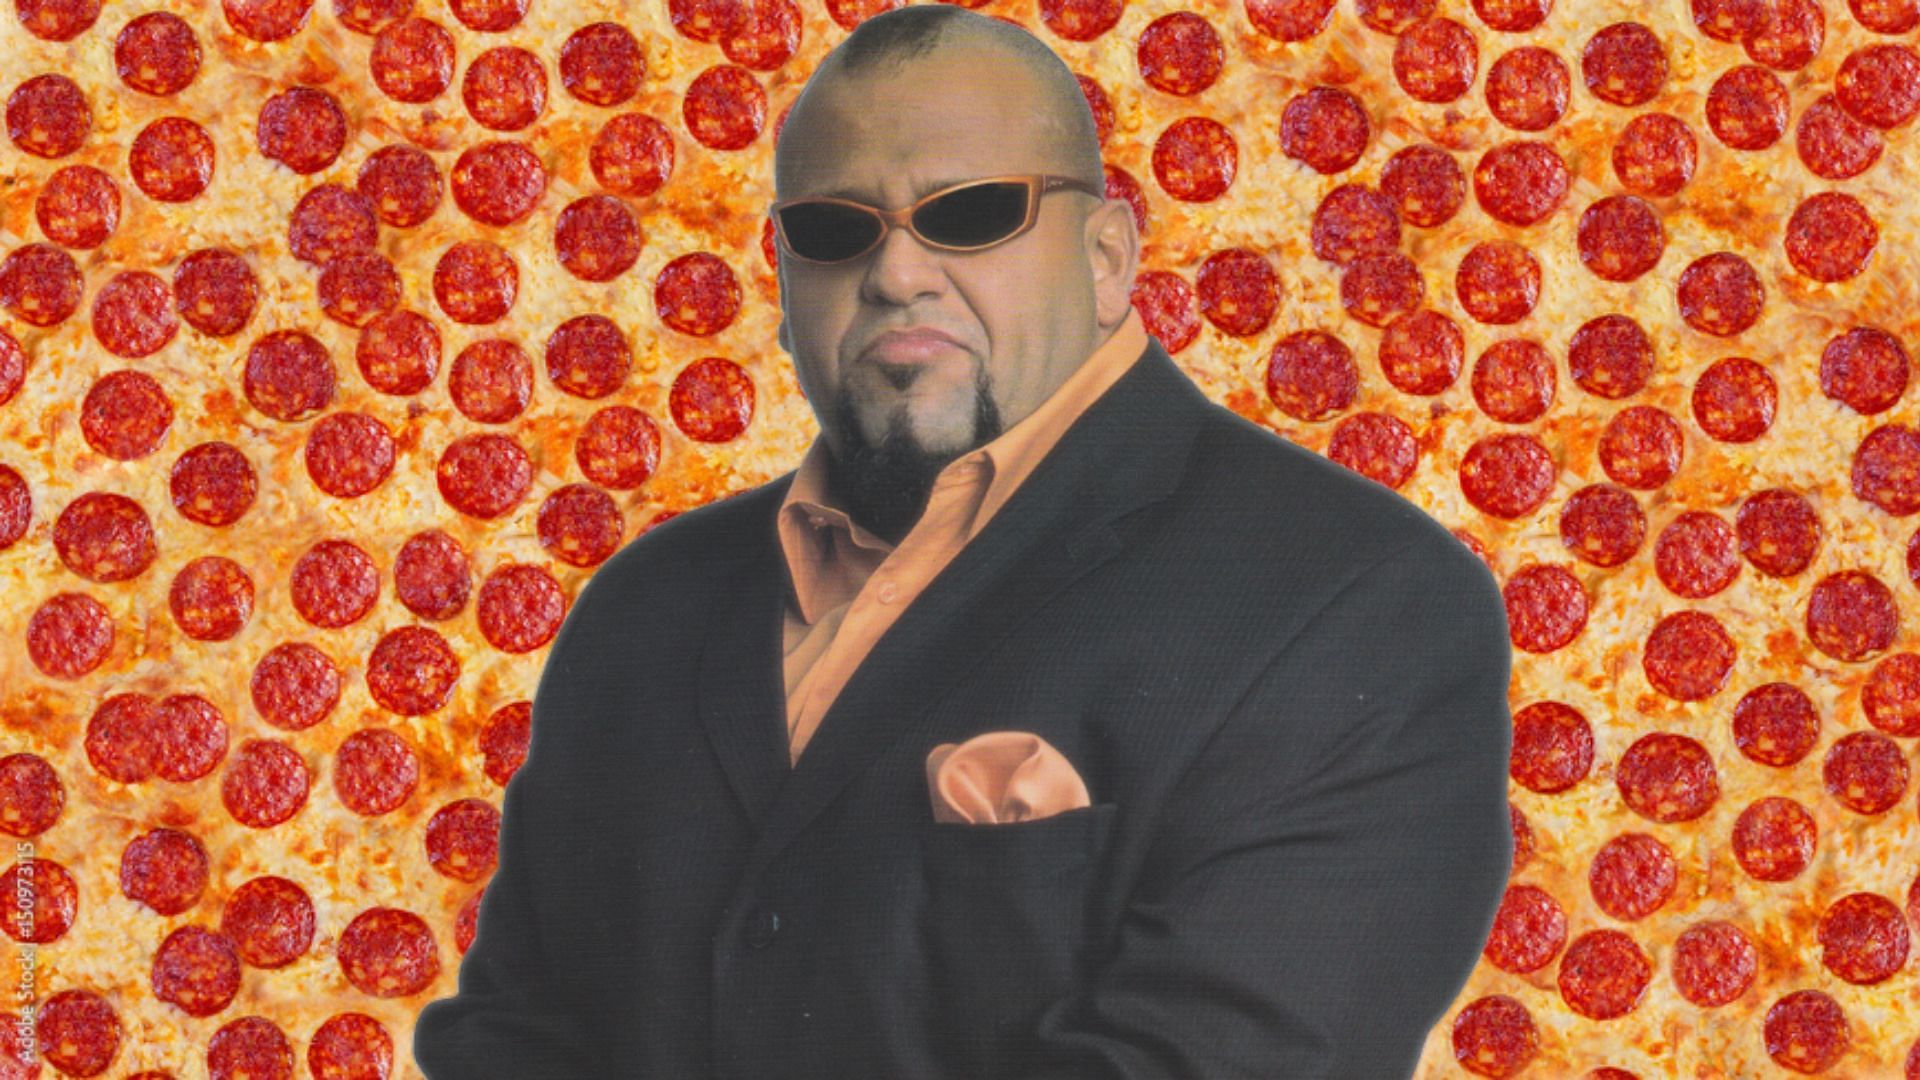 Taz made his name in ECW in the 1990s